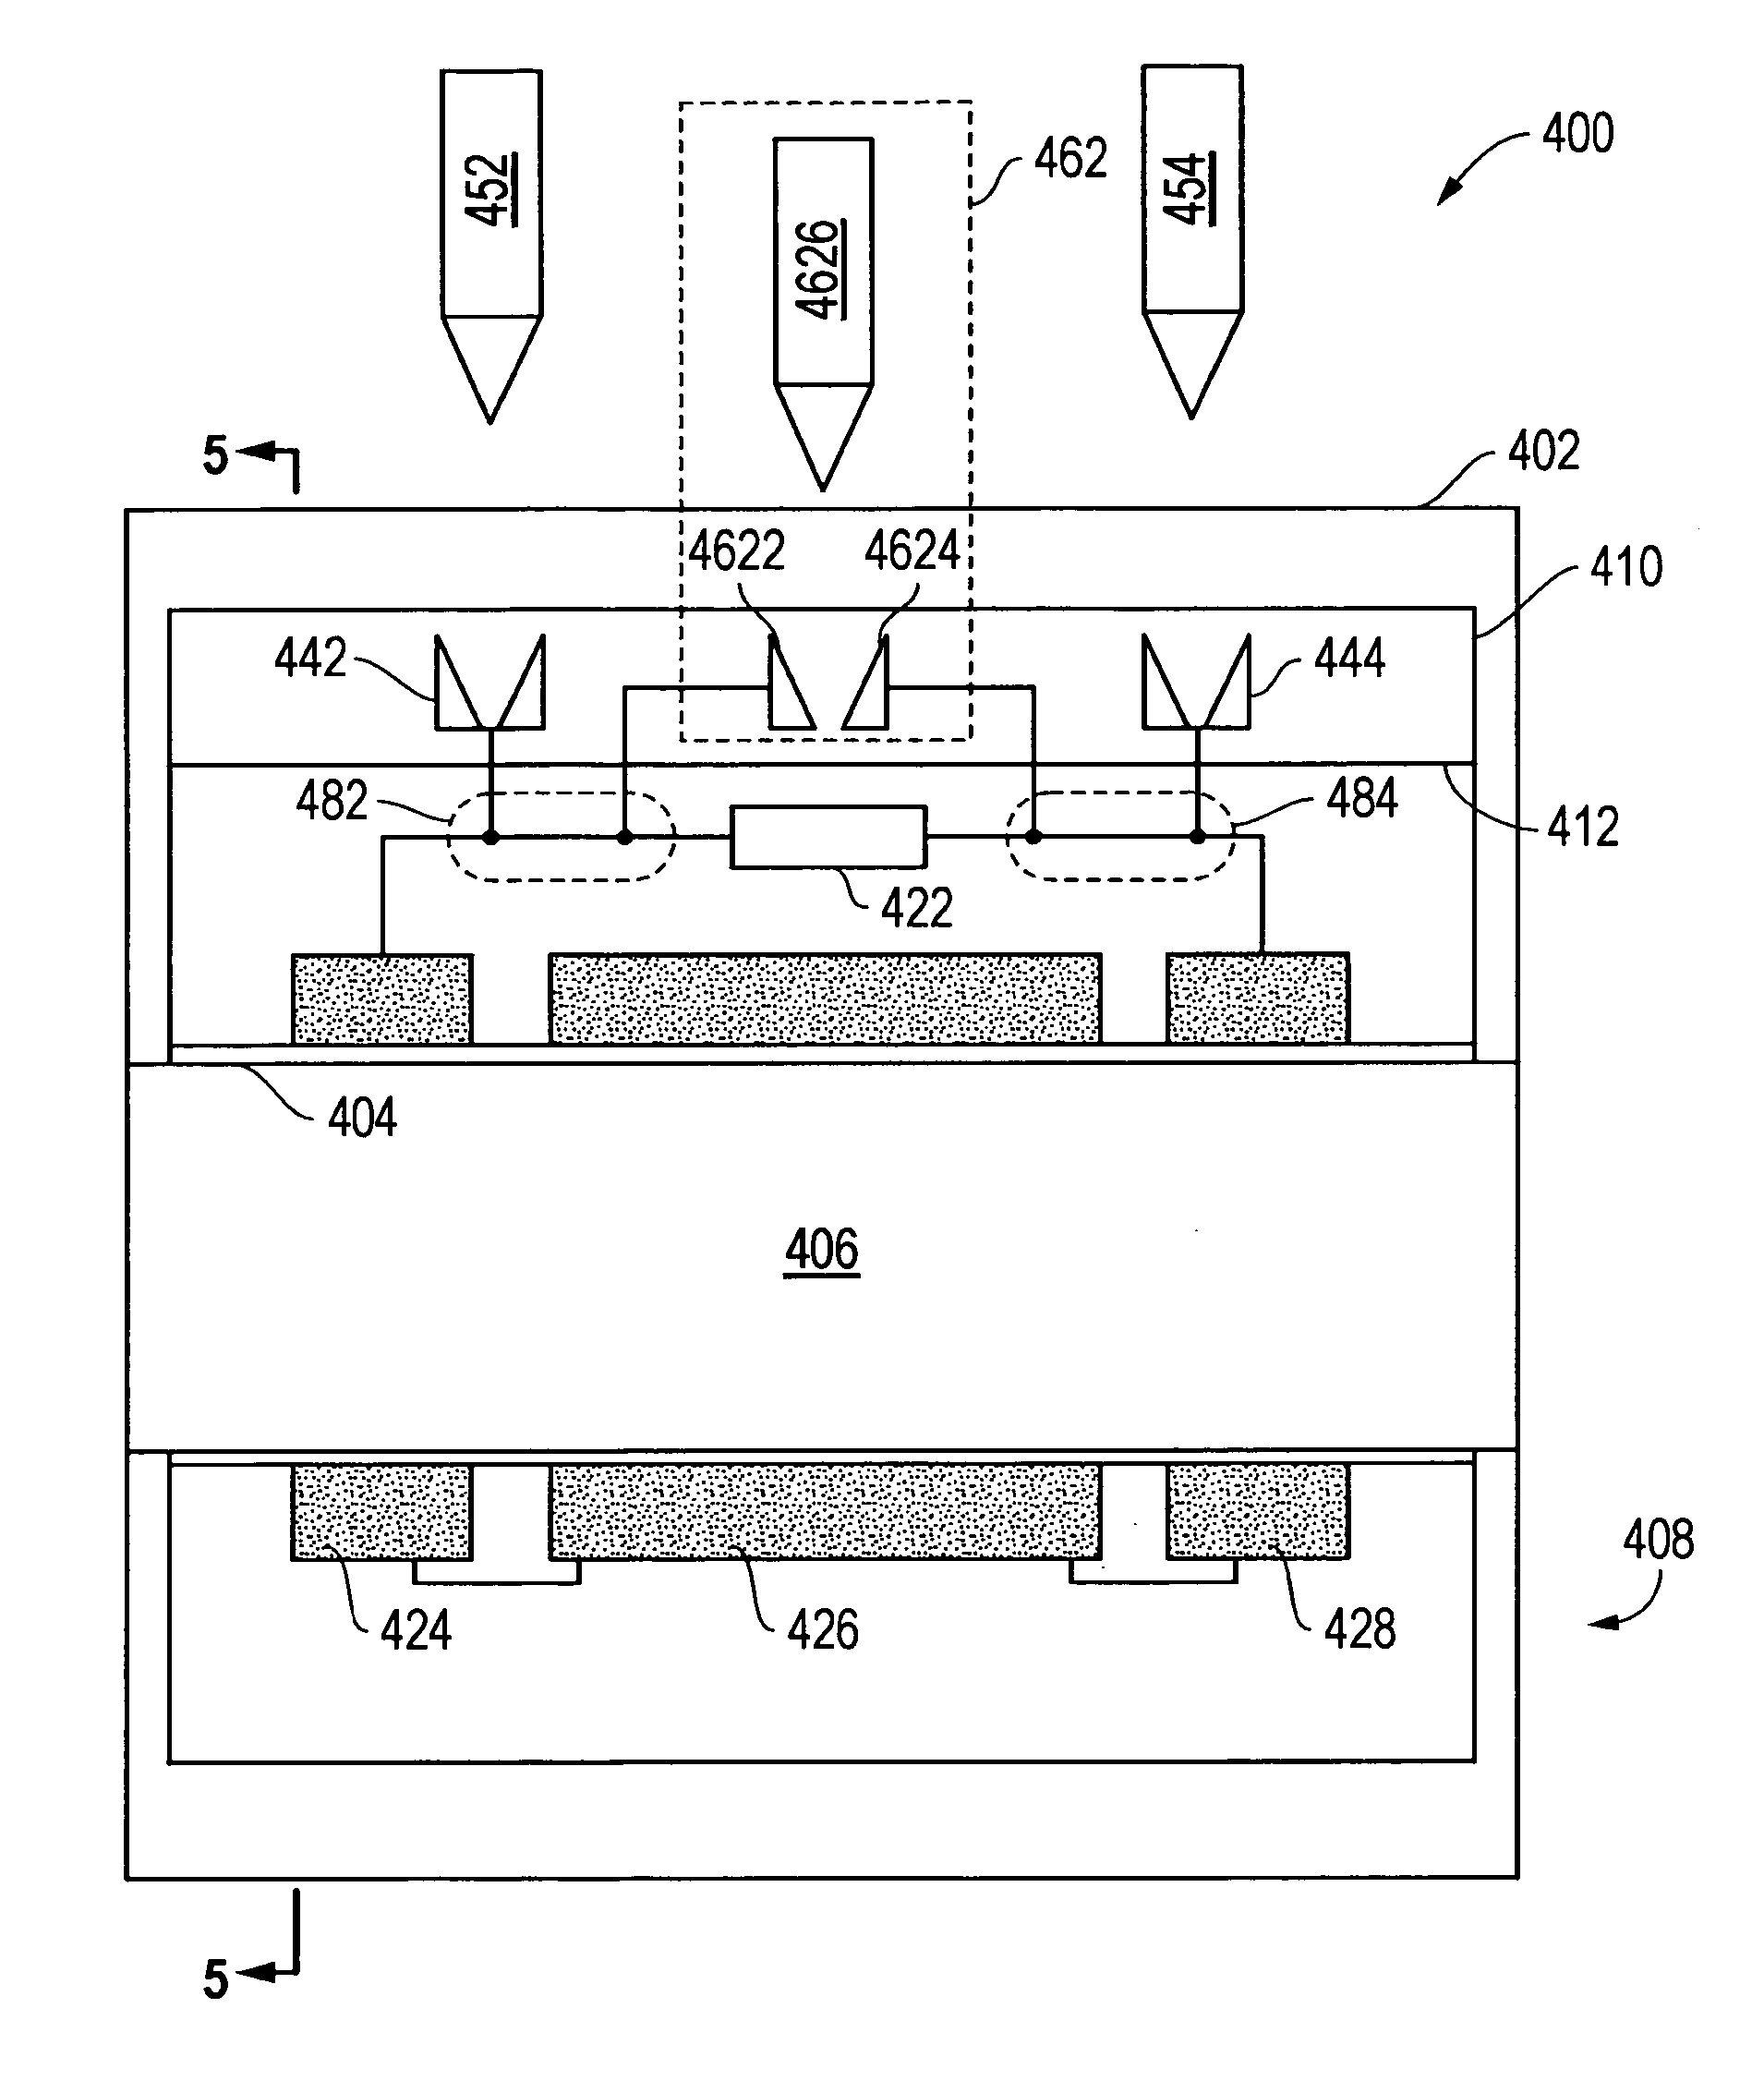 Circuit including a superconducting element and a switch, a system including the circuit, and a method of using the system